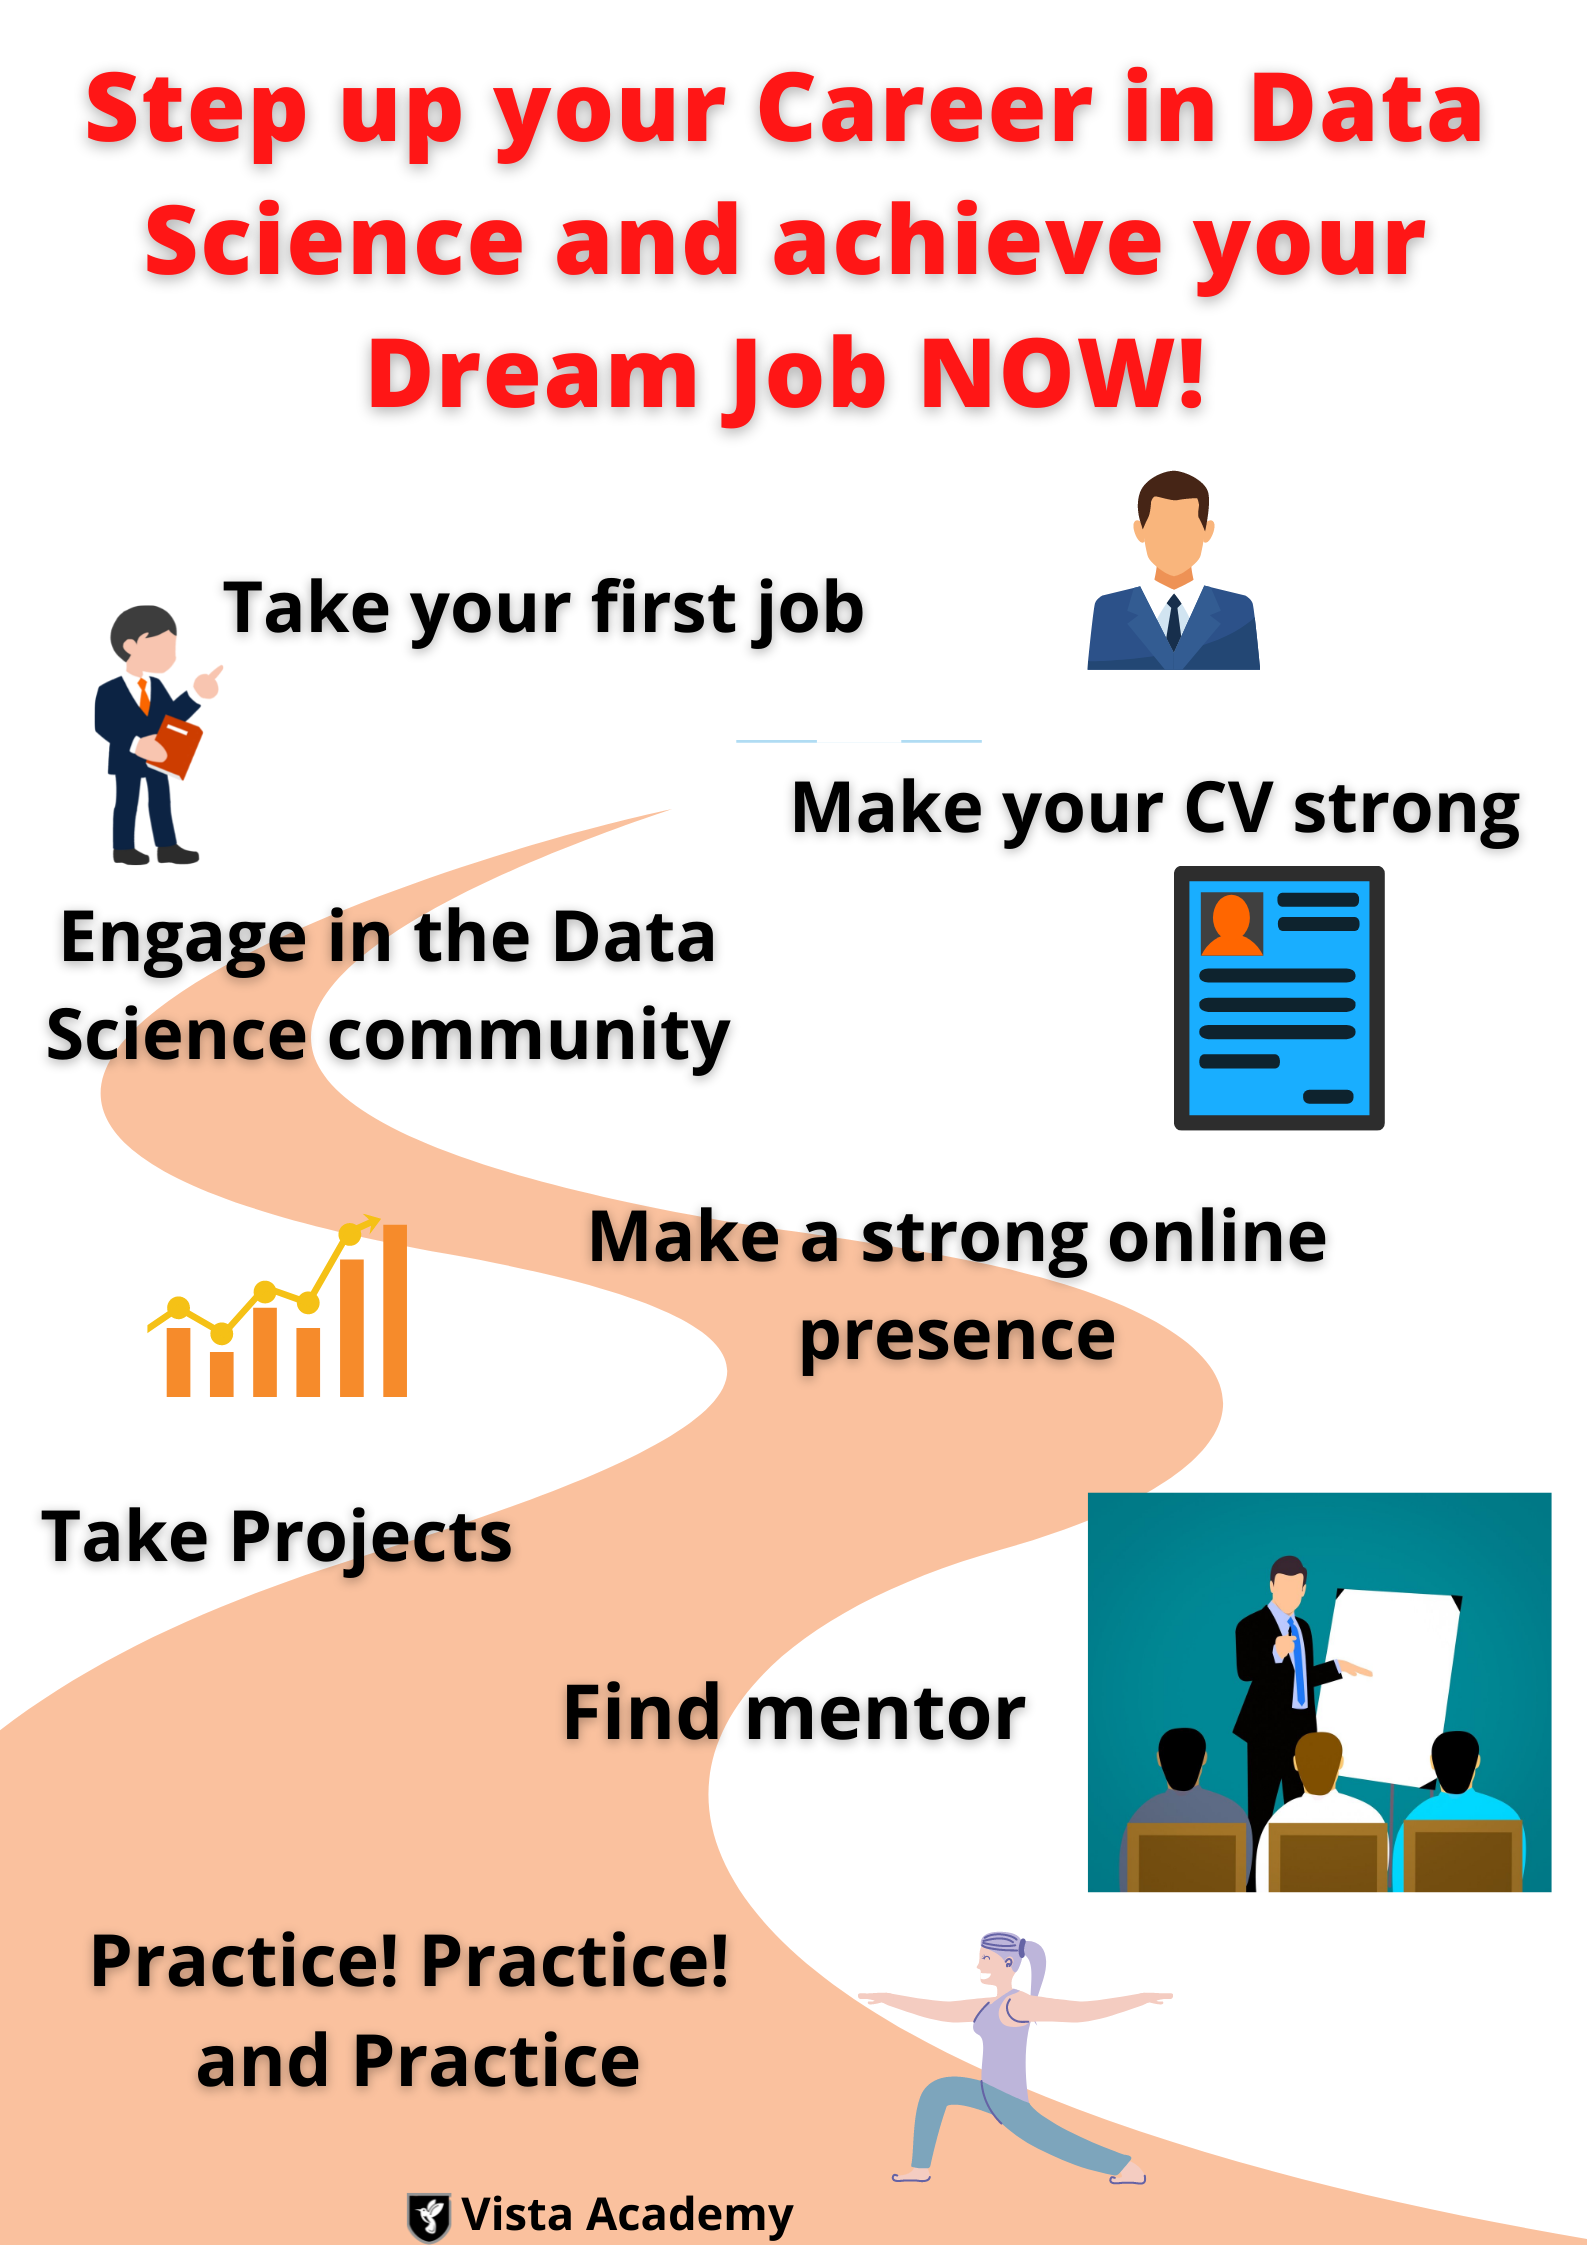 Step up your Career in Data Science and achieve your Dream Job NOW!!